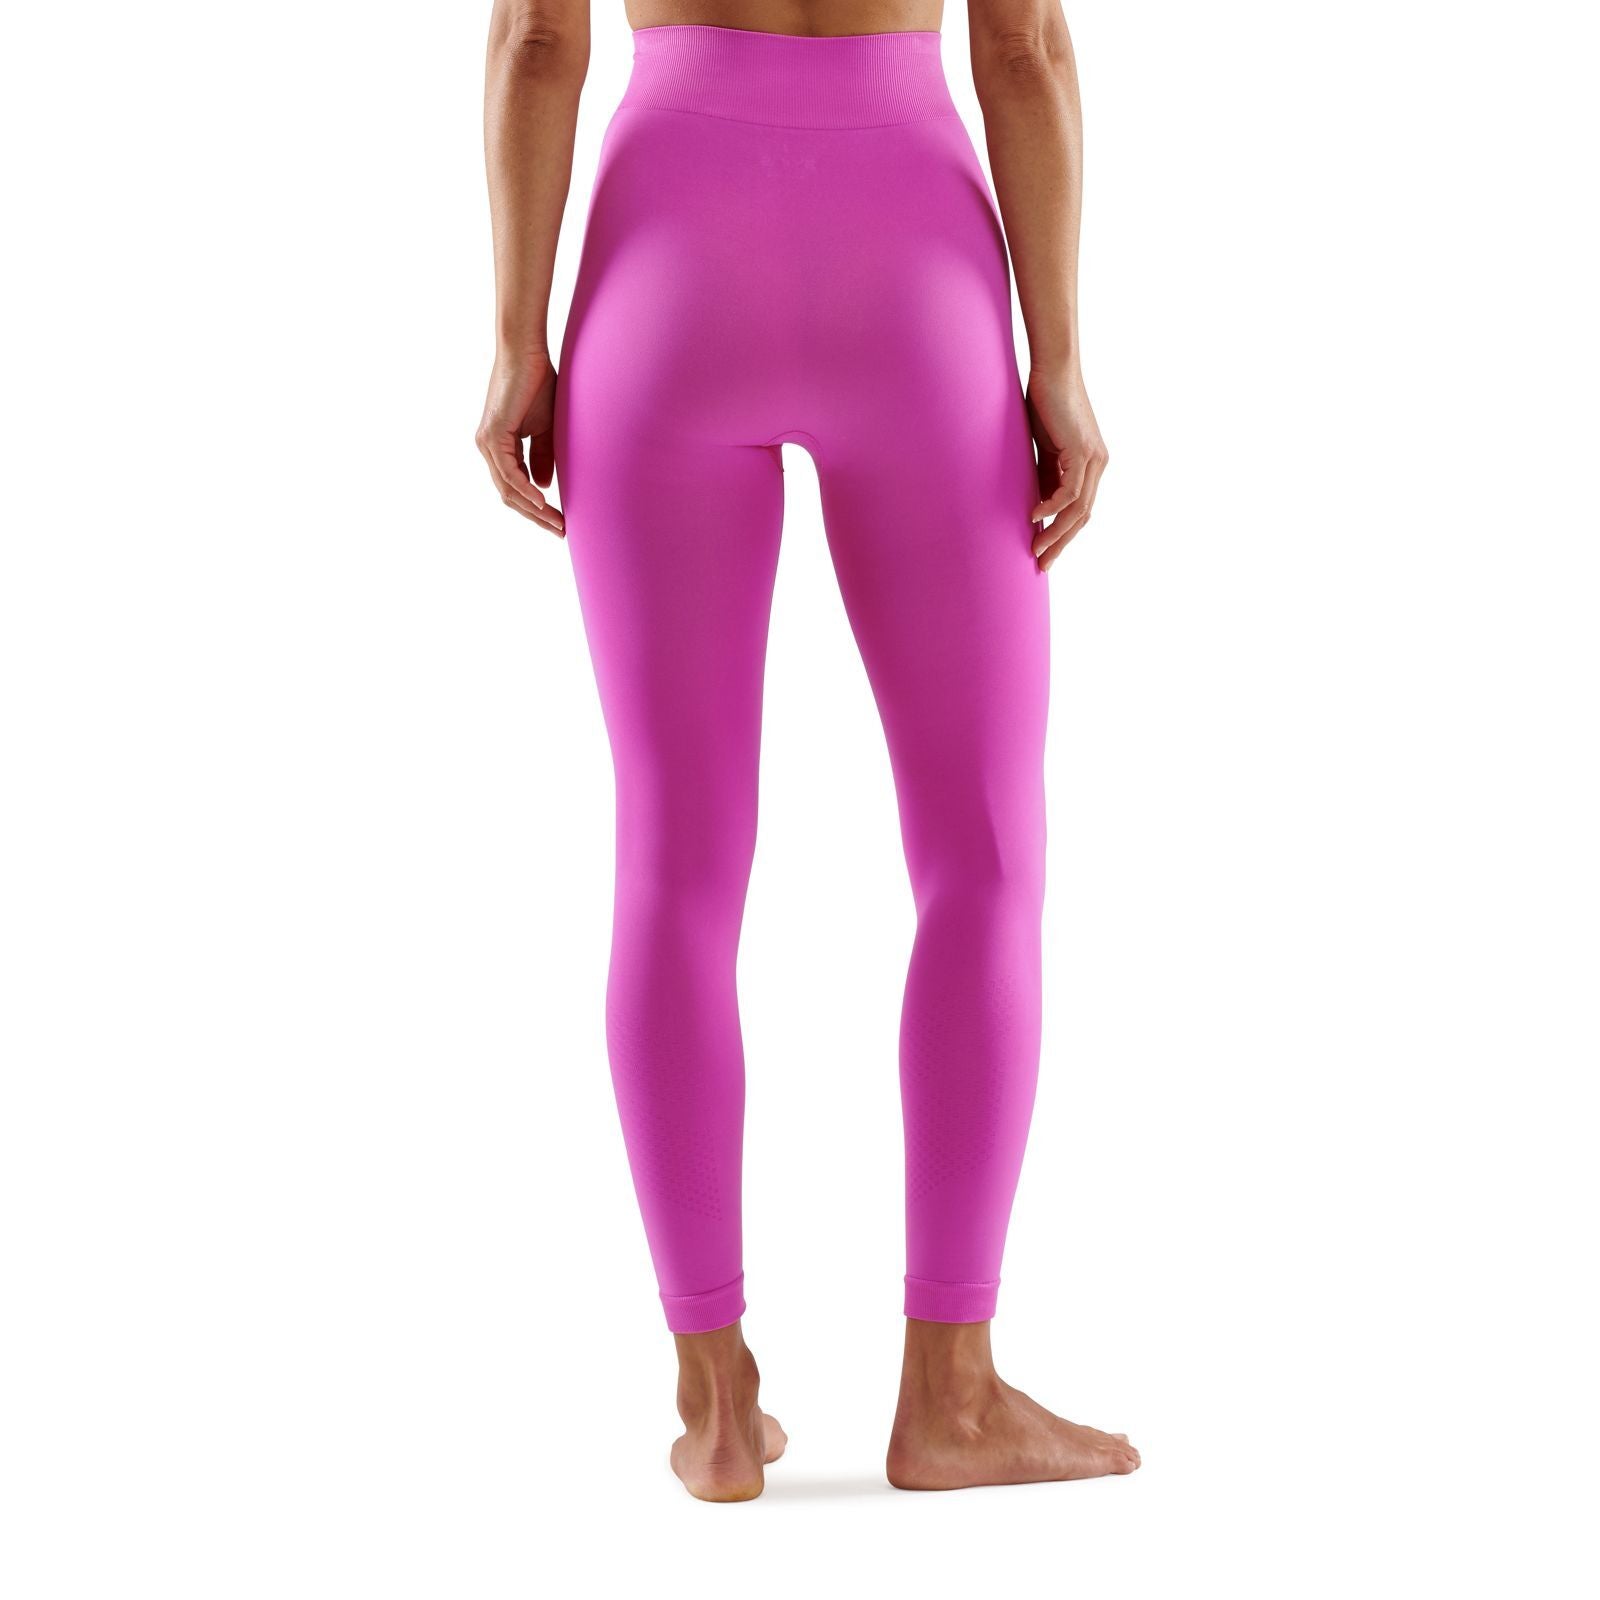 SKINS Compression Series-3 Women's 7/8 Long Tights Iris Orchid M